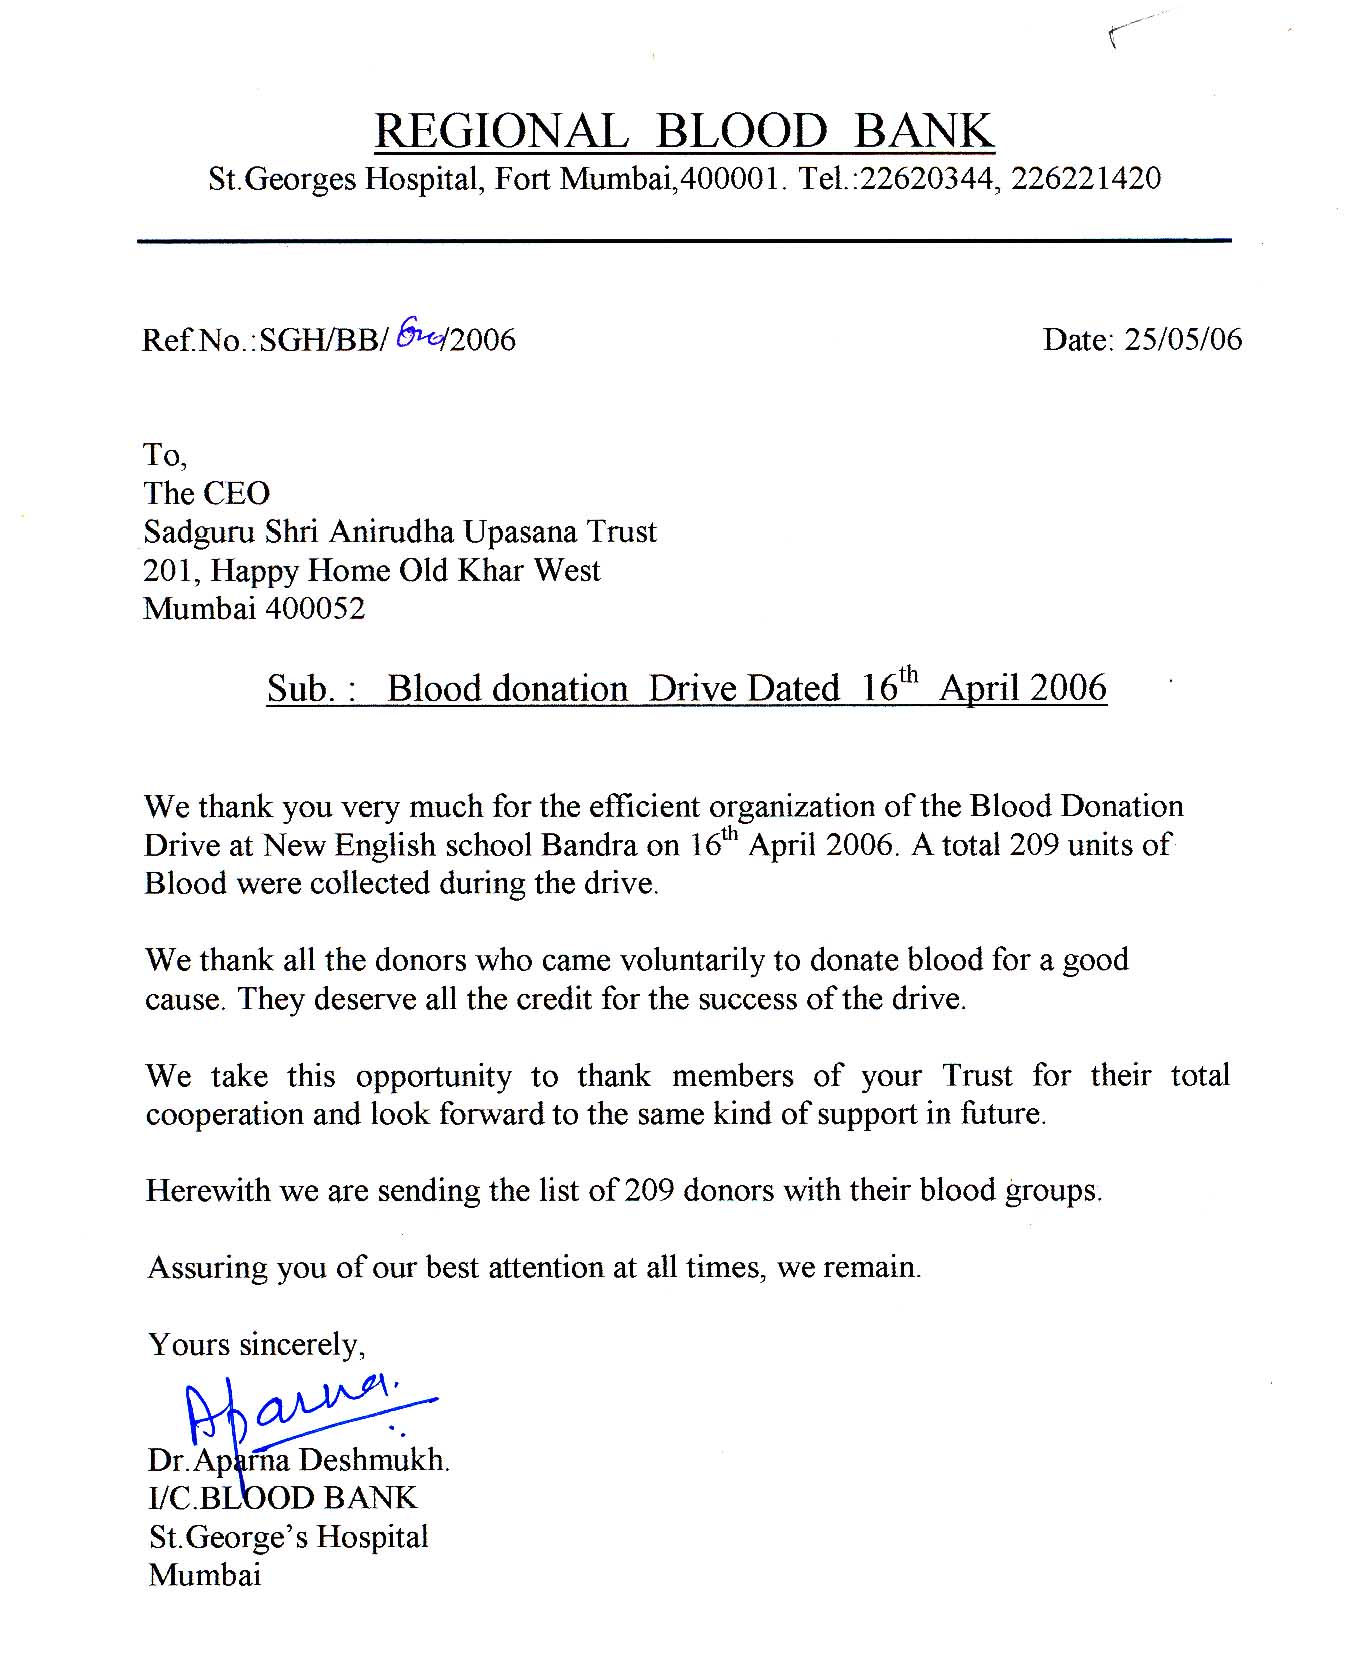 Appreciation-Letter from Regional Blood Bank 2006 -for-Aniruddhafoundation-Compassion-Social-services